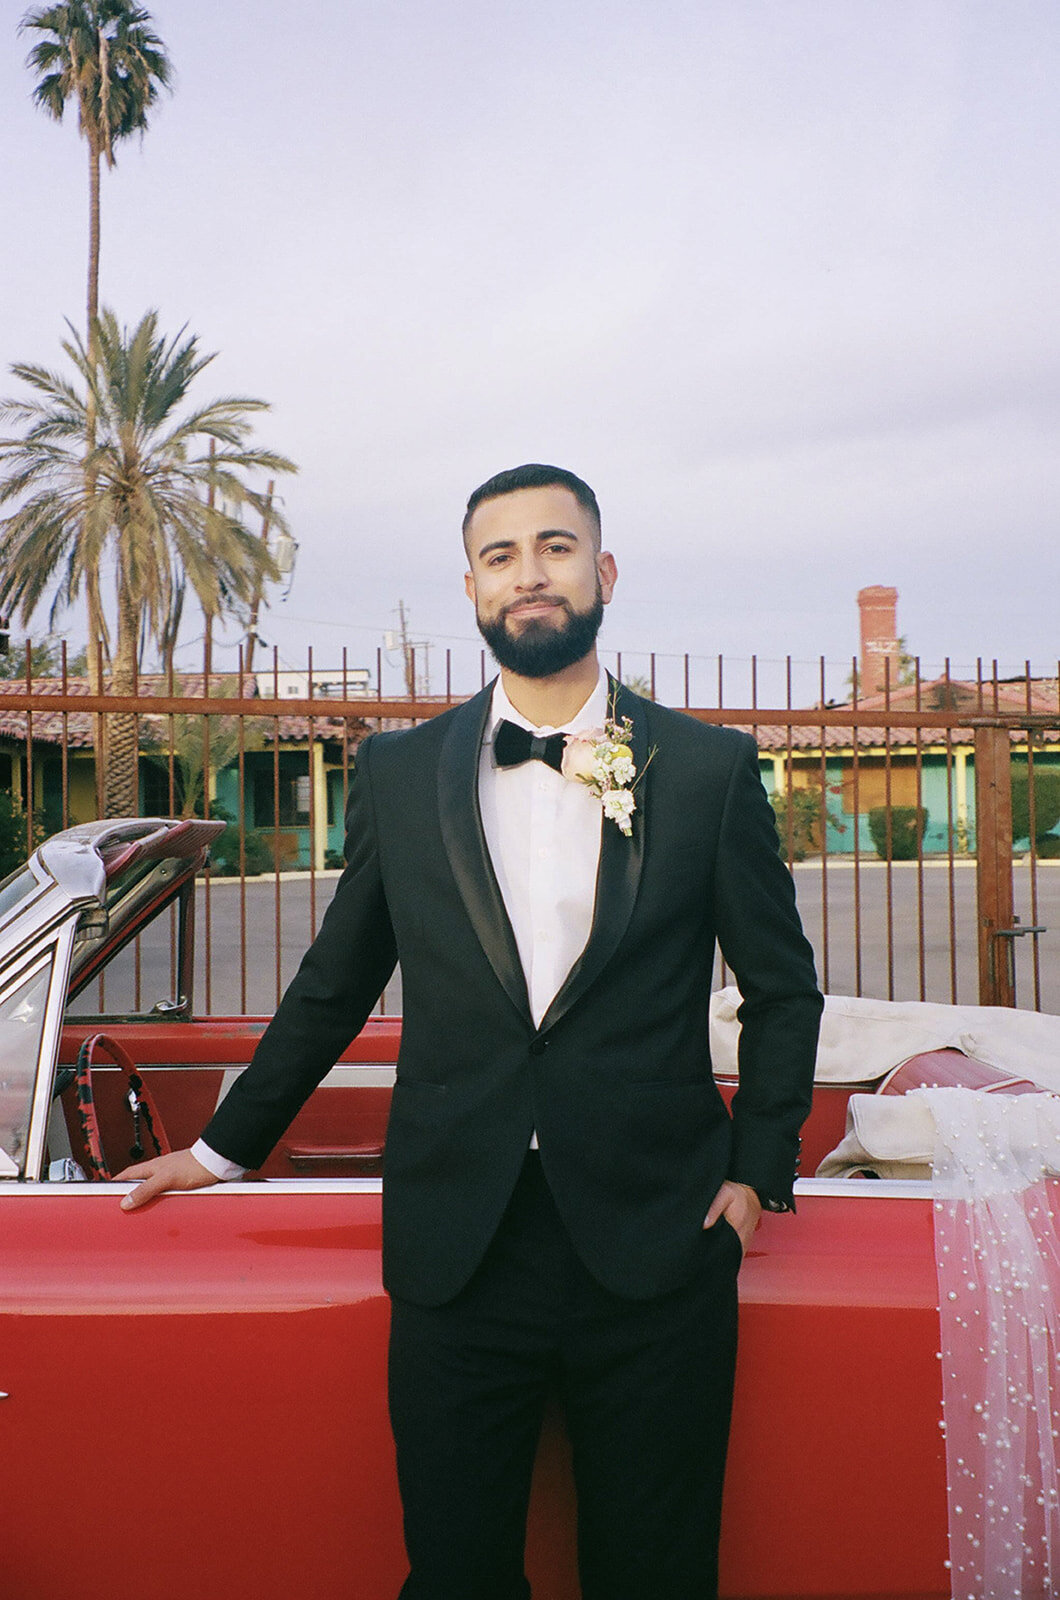 Groom standing with classic car for Las Vegas Elopement